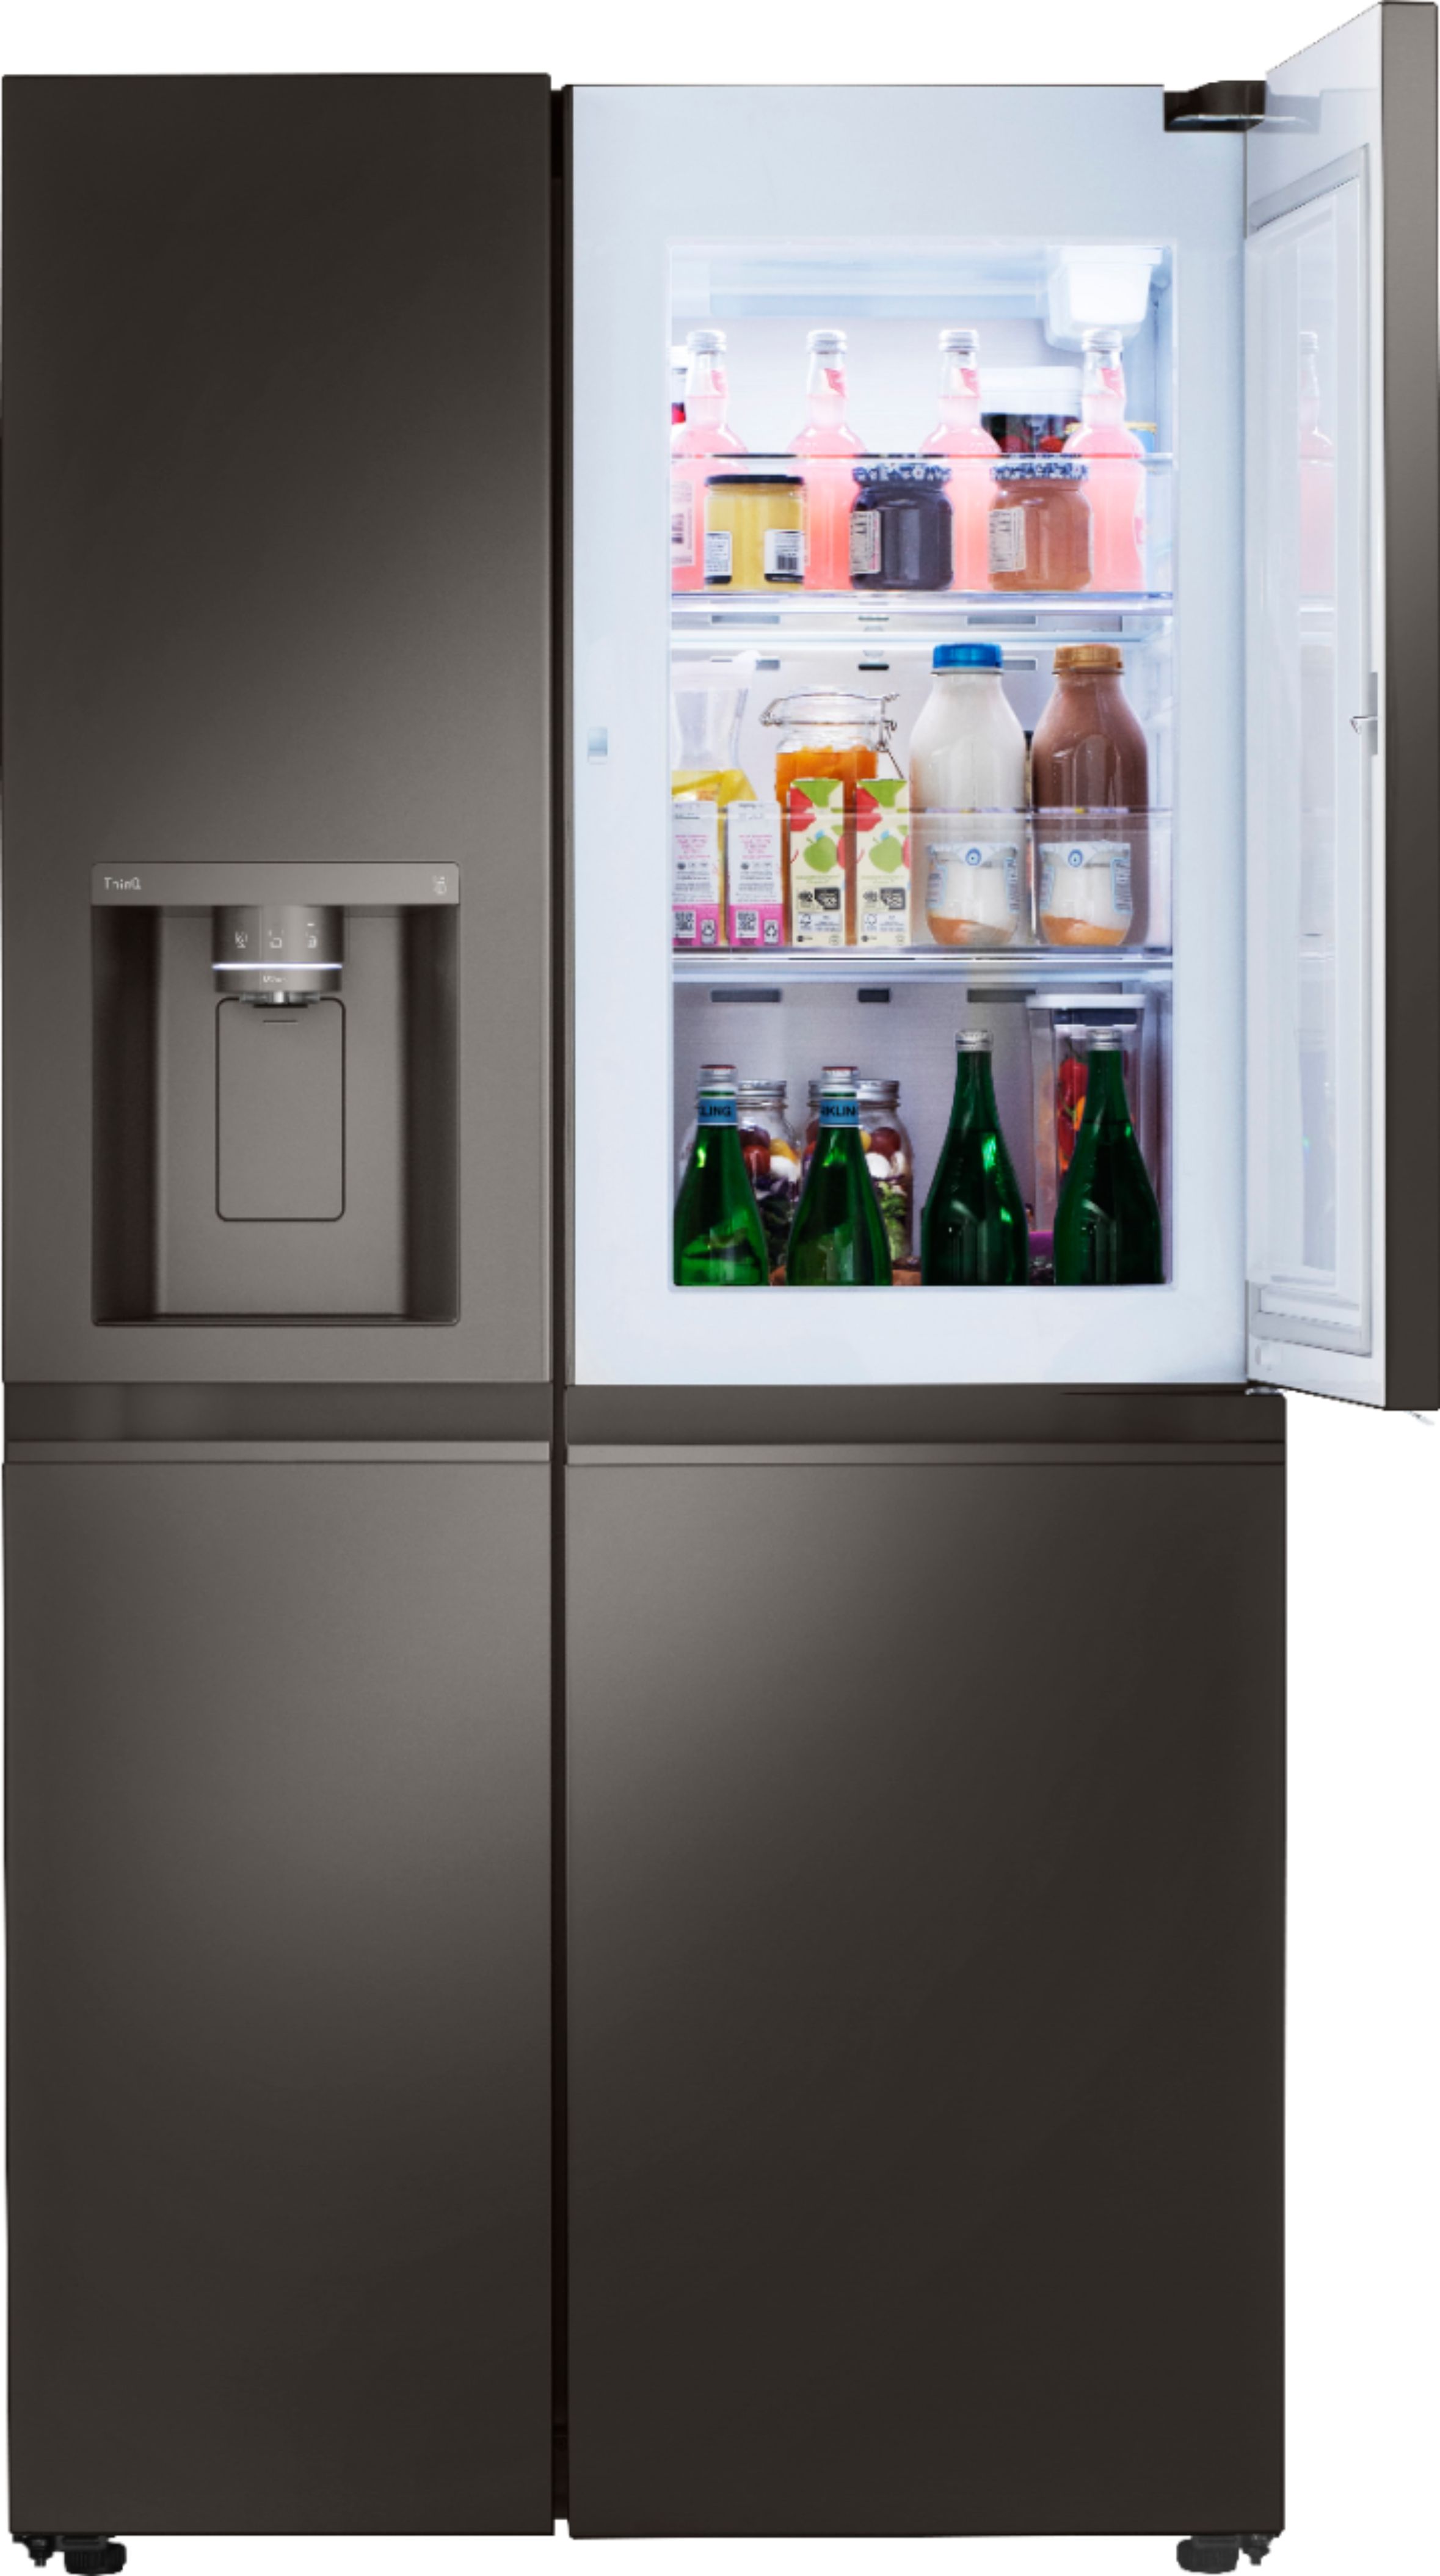 Angle View: LG - 27.1 cu ft Side by Side Refrigerator with Door in Door, Craft Ice, and Smart Wi-Fi - Black stainless steel